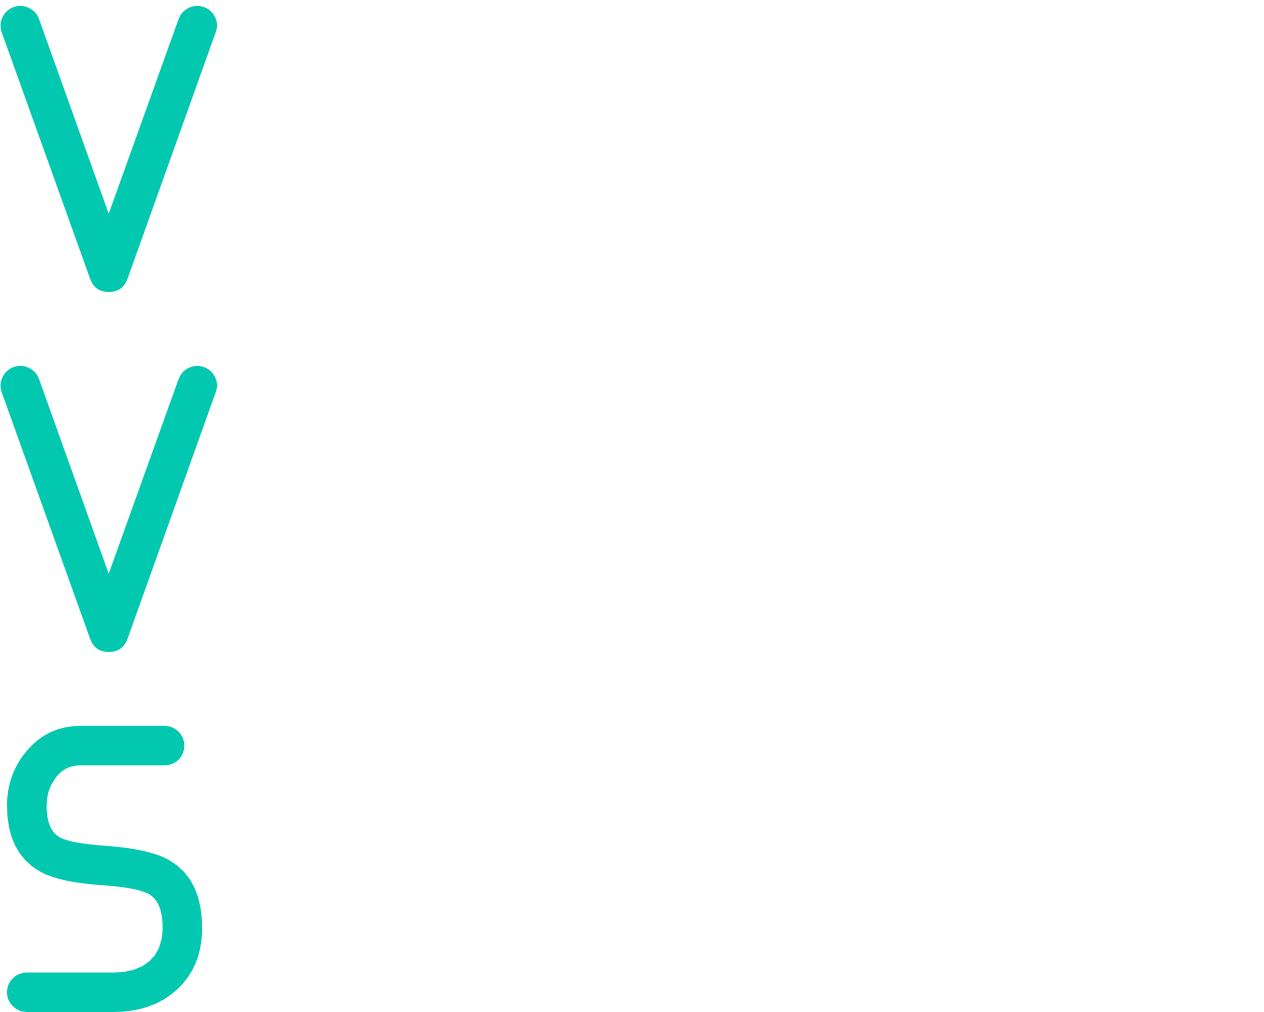 //www.fast-fourriere.com/wp-content/uploads/2019/02/Virtual-Vehicle-Status.png